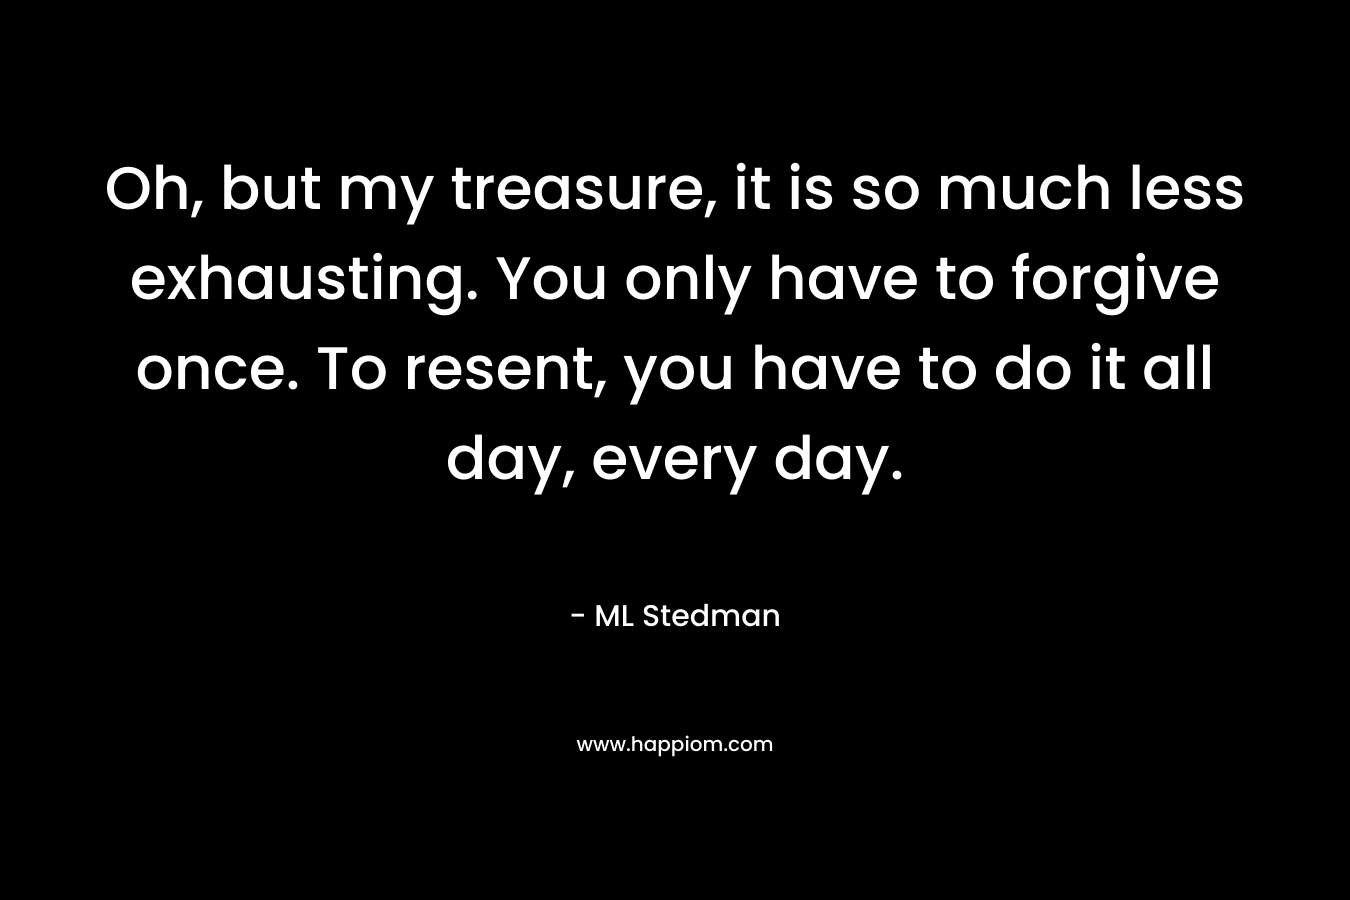 Oh, but my treasure, it is so much less exhausting. You only have to forgive once. To resent, you have to do it all day, every day. – ML Stedman